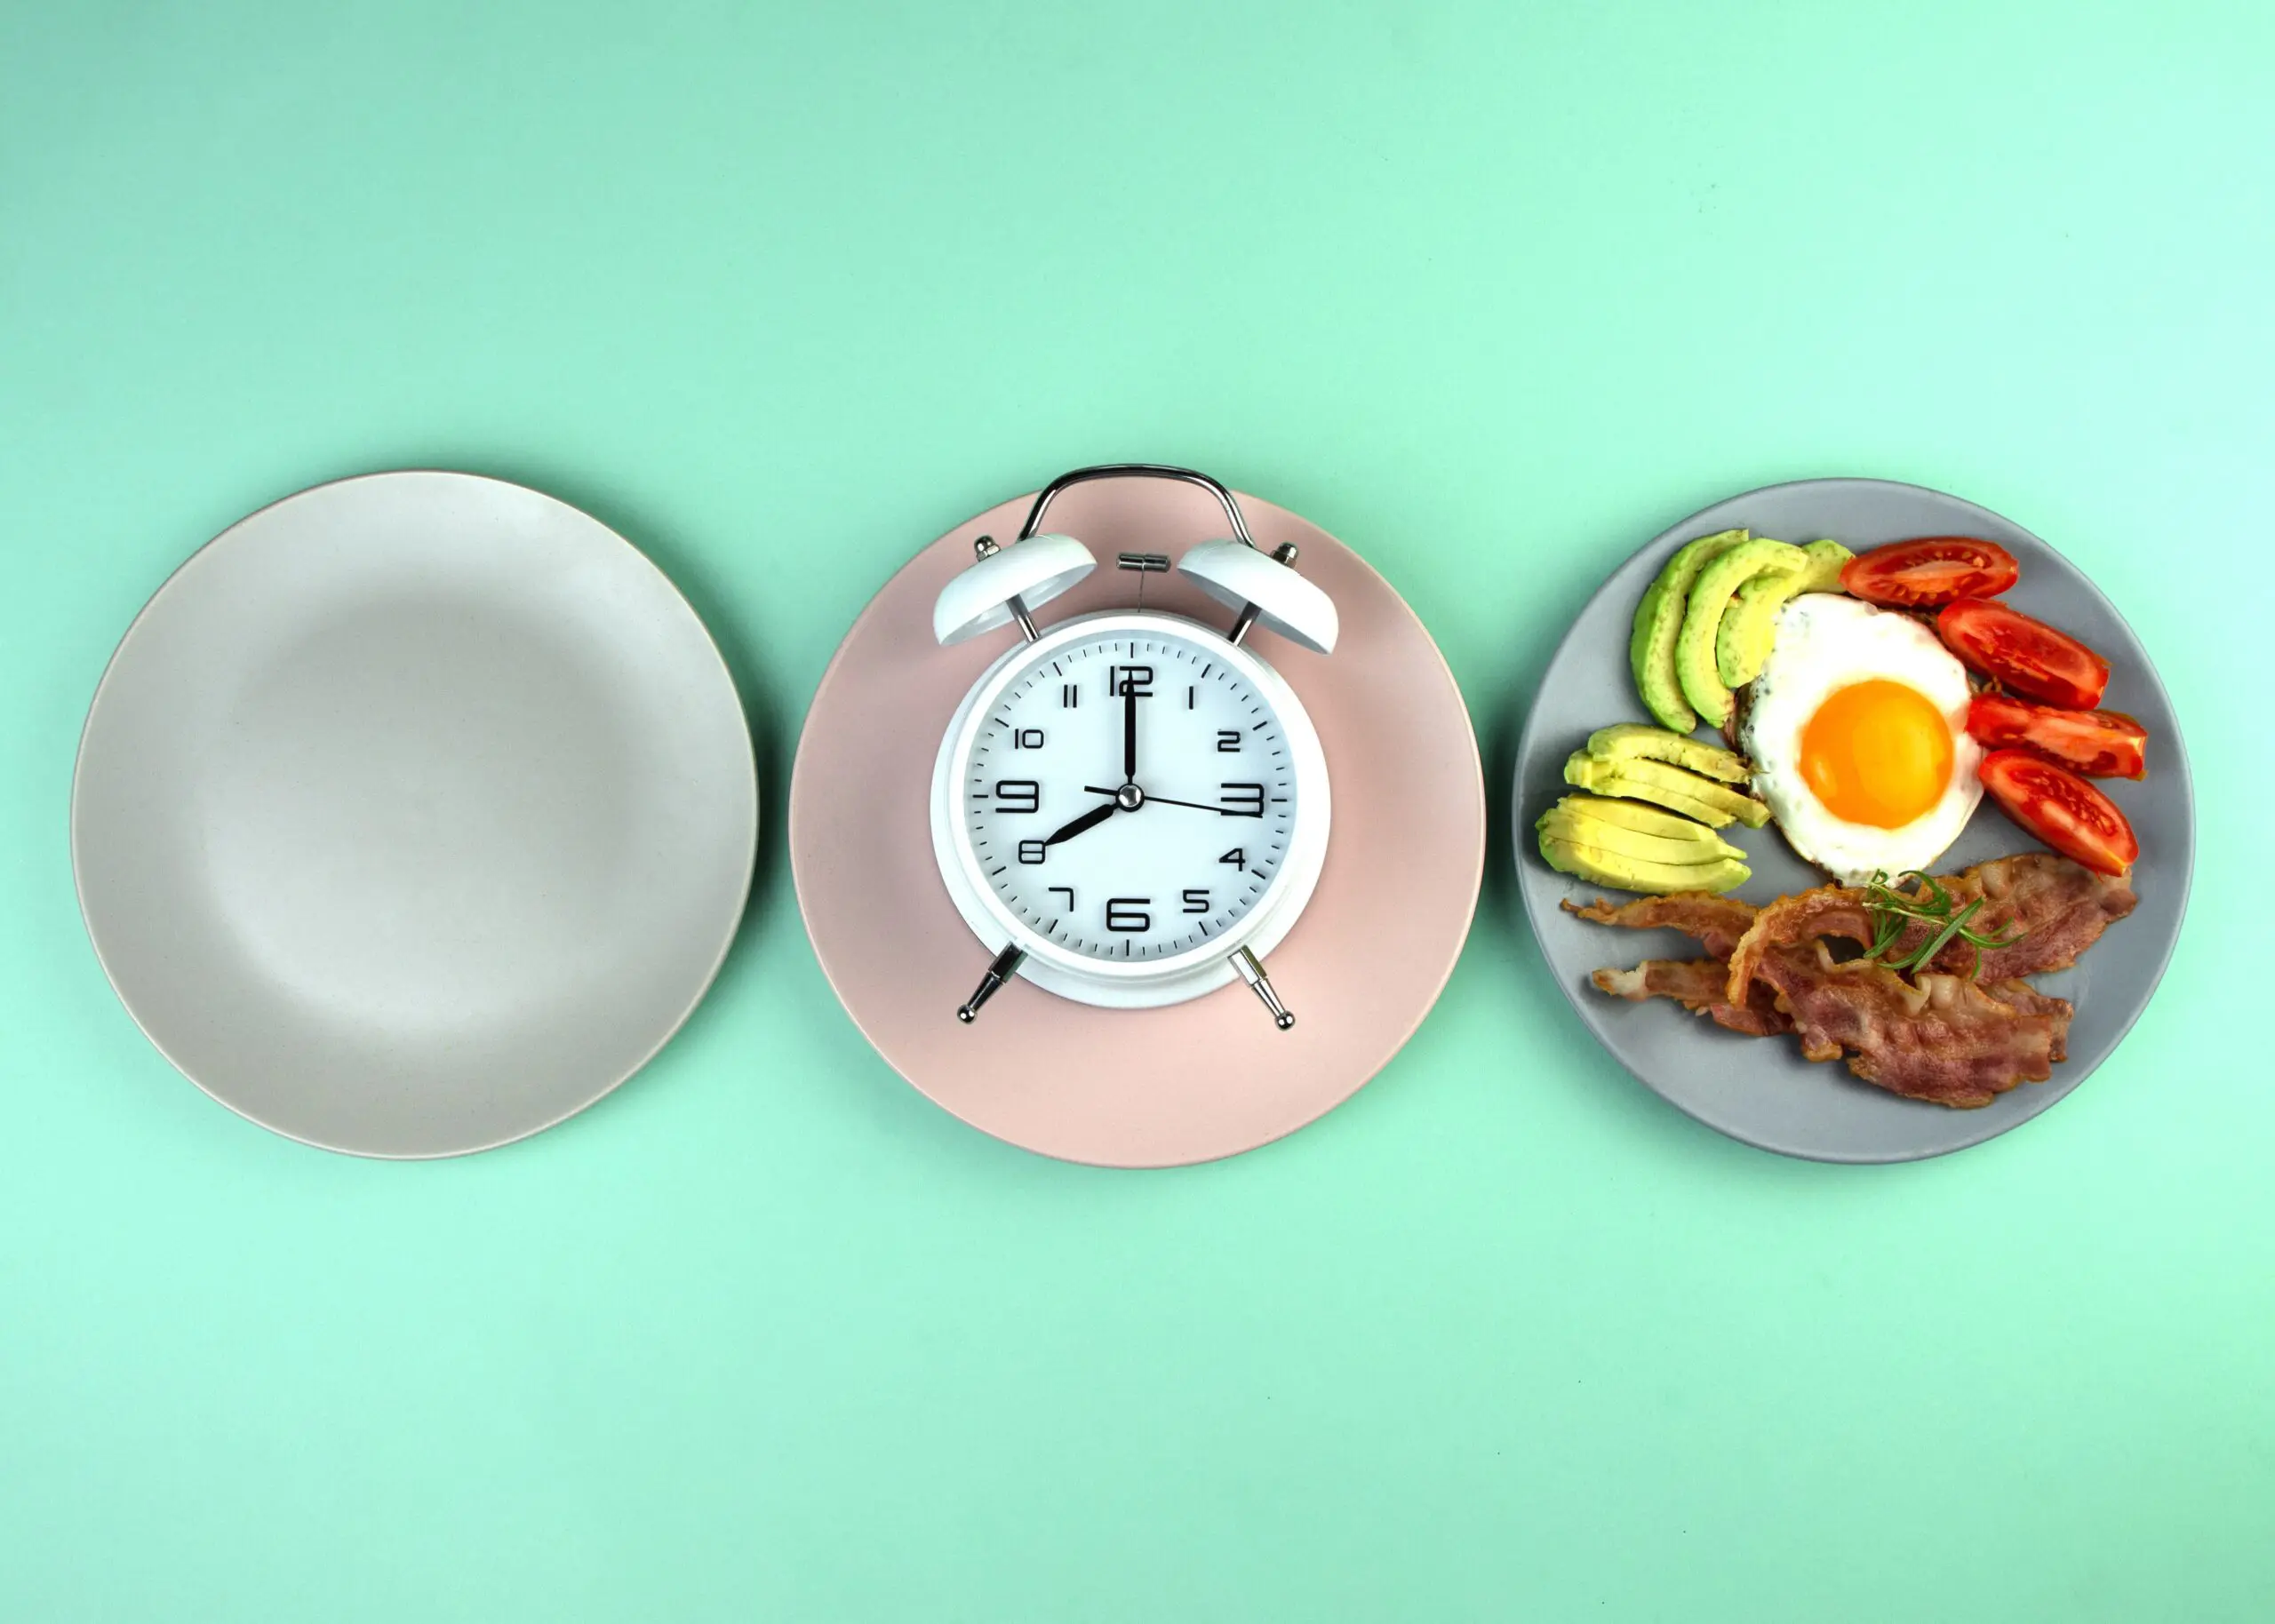 Plates of food with clock on scaled